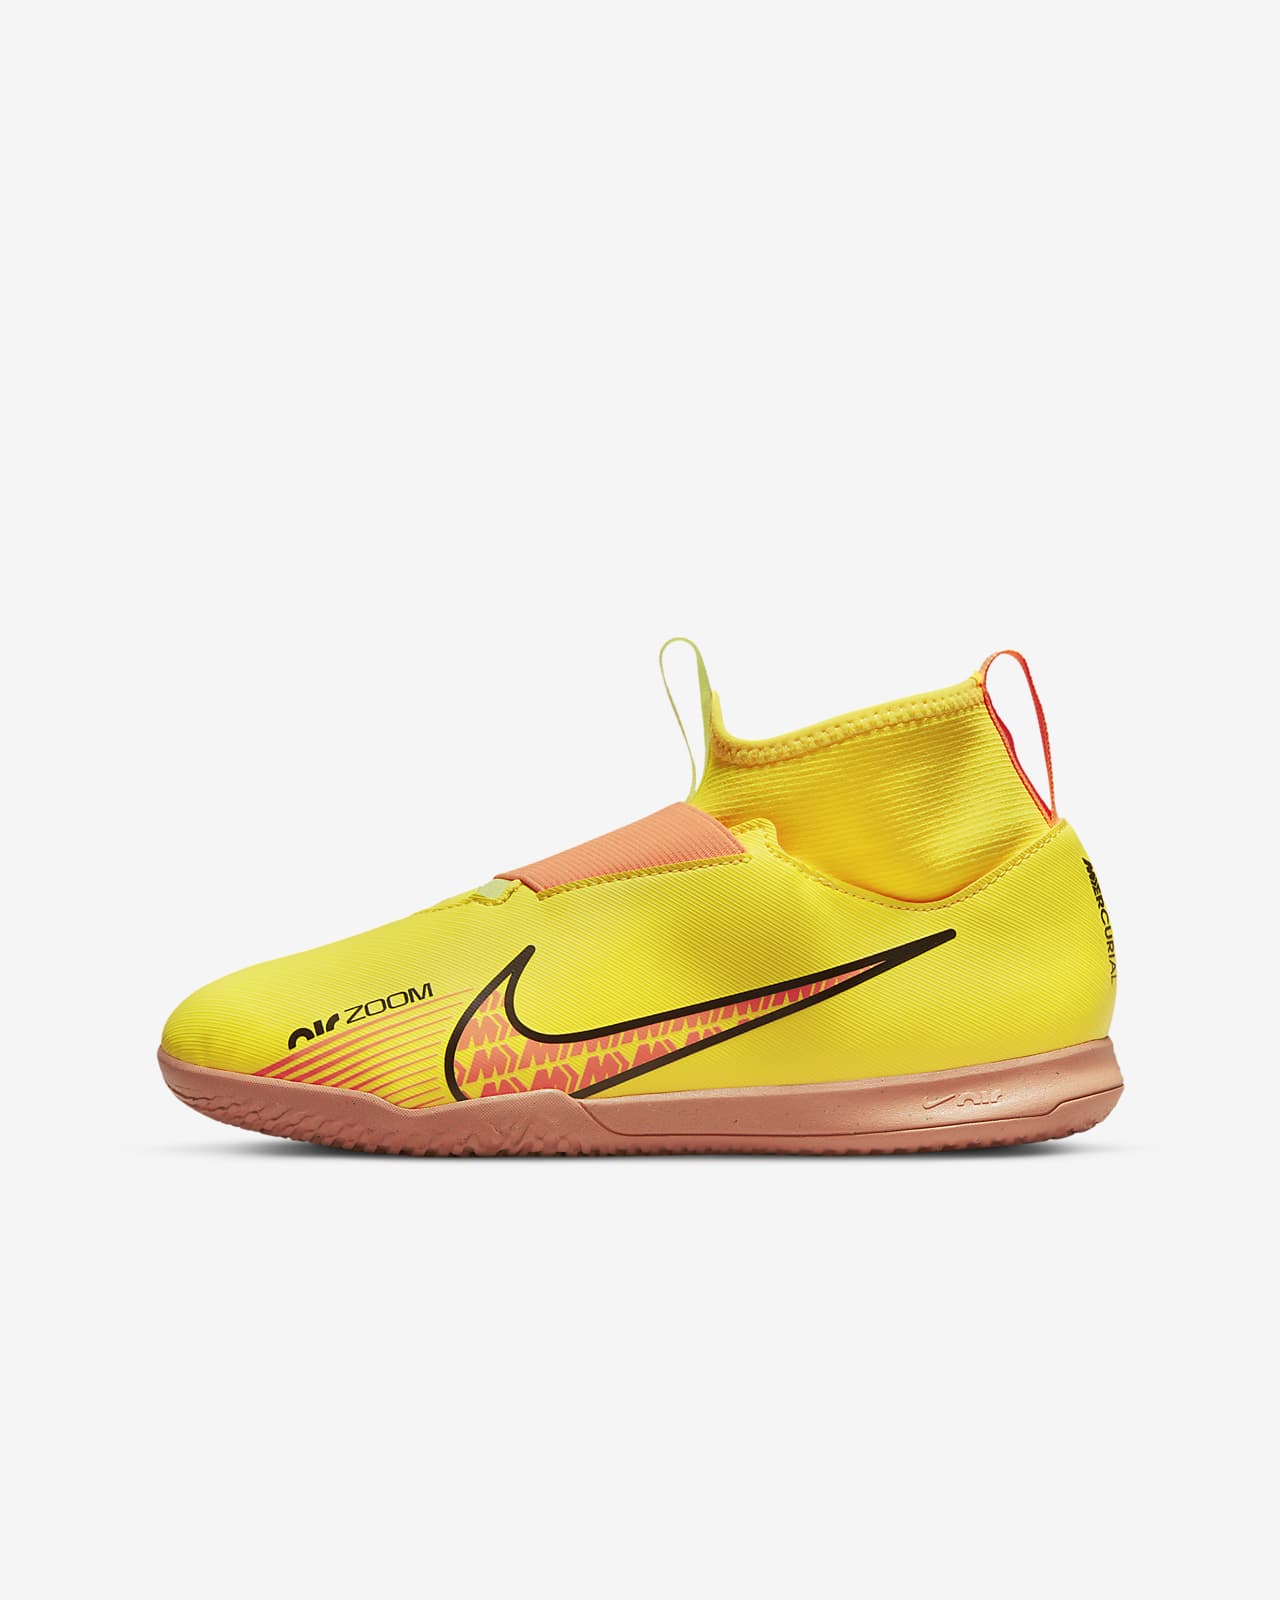 Nike Mercurial Superfly Indoor Soccer Shoes | vlr.eng.br